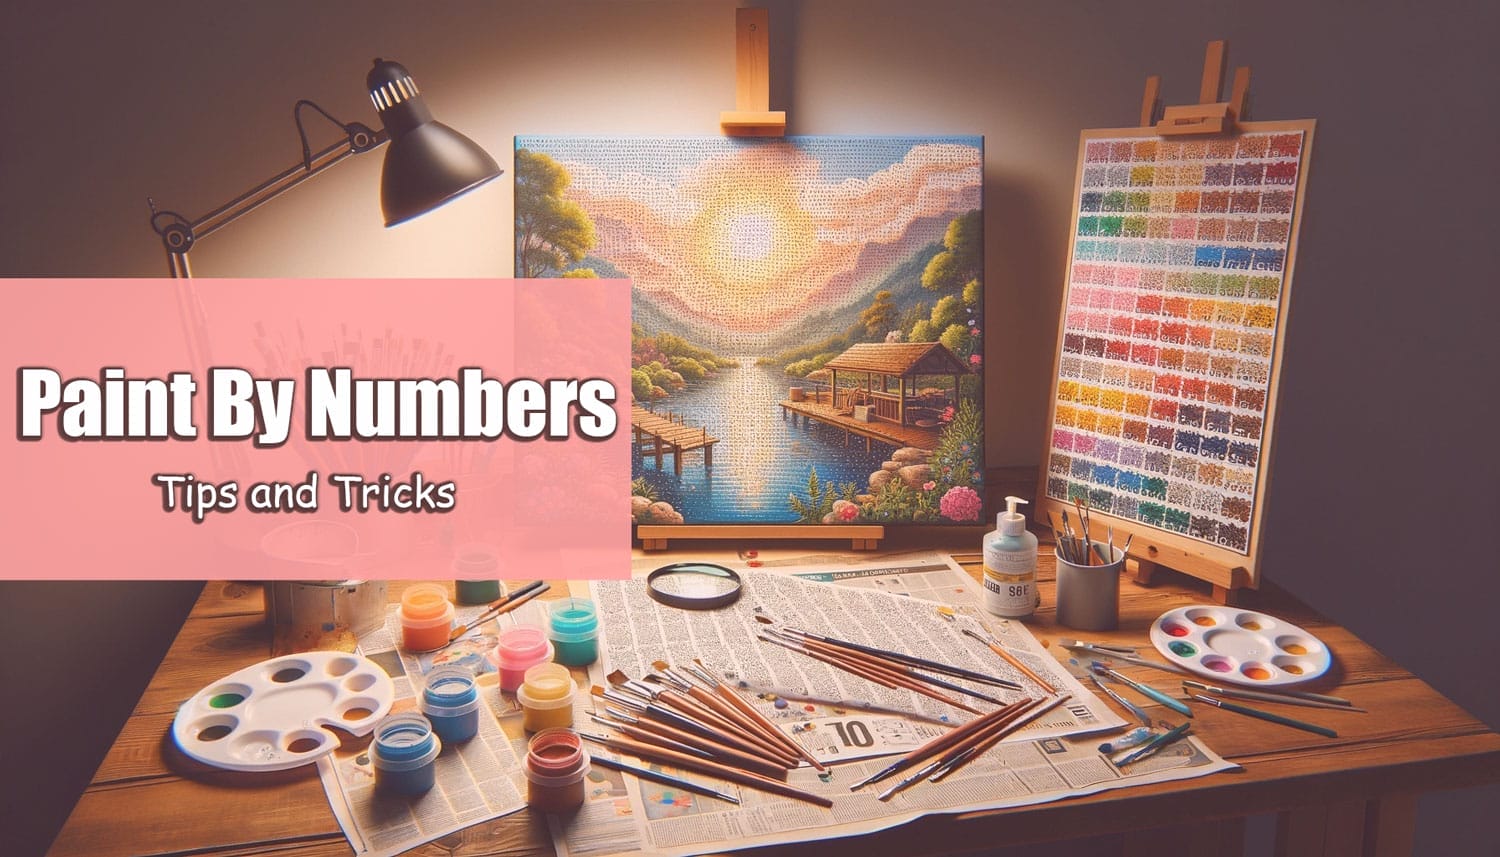 Why I HATE this Paint by Numbers - Tips & Tricks for Painting by Numbers 